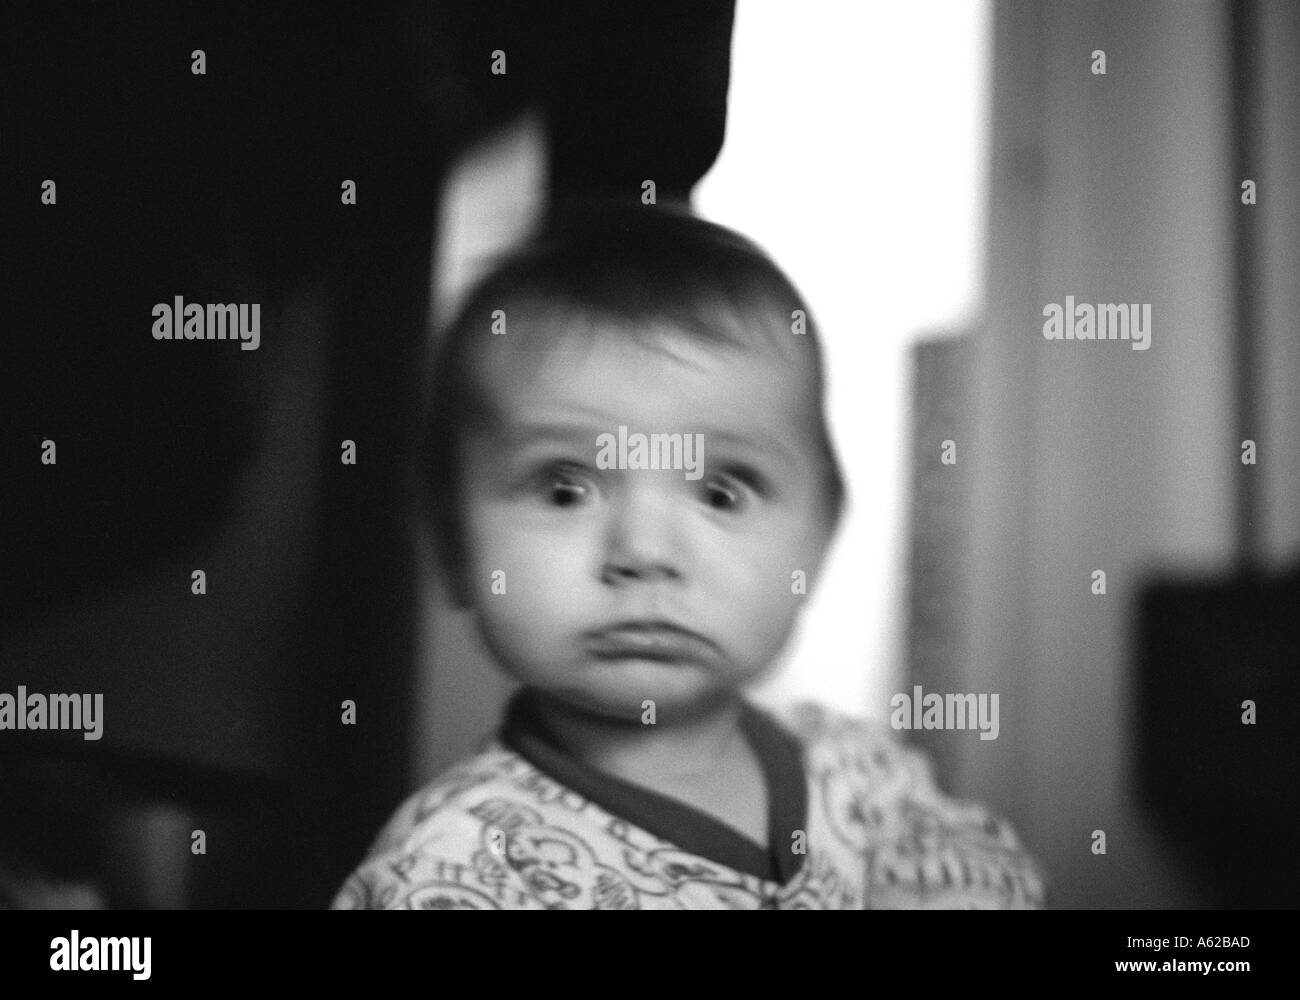 blurred head and shoulders shot of a baby pulling funny shocked expression Stock Photo